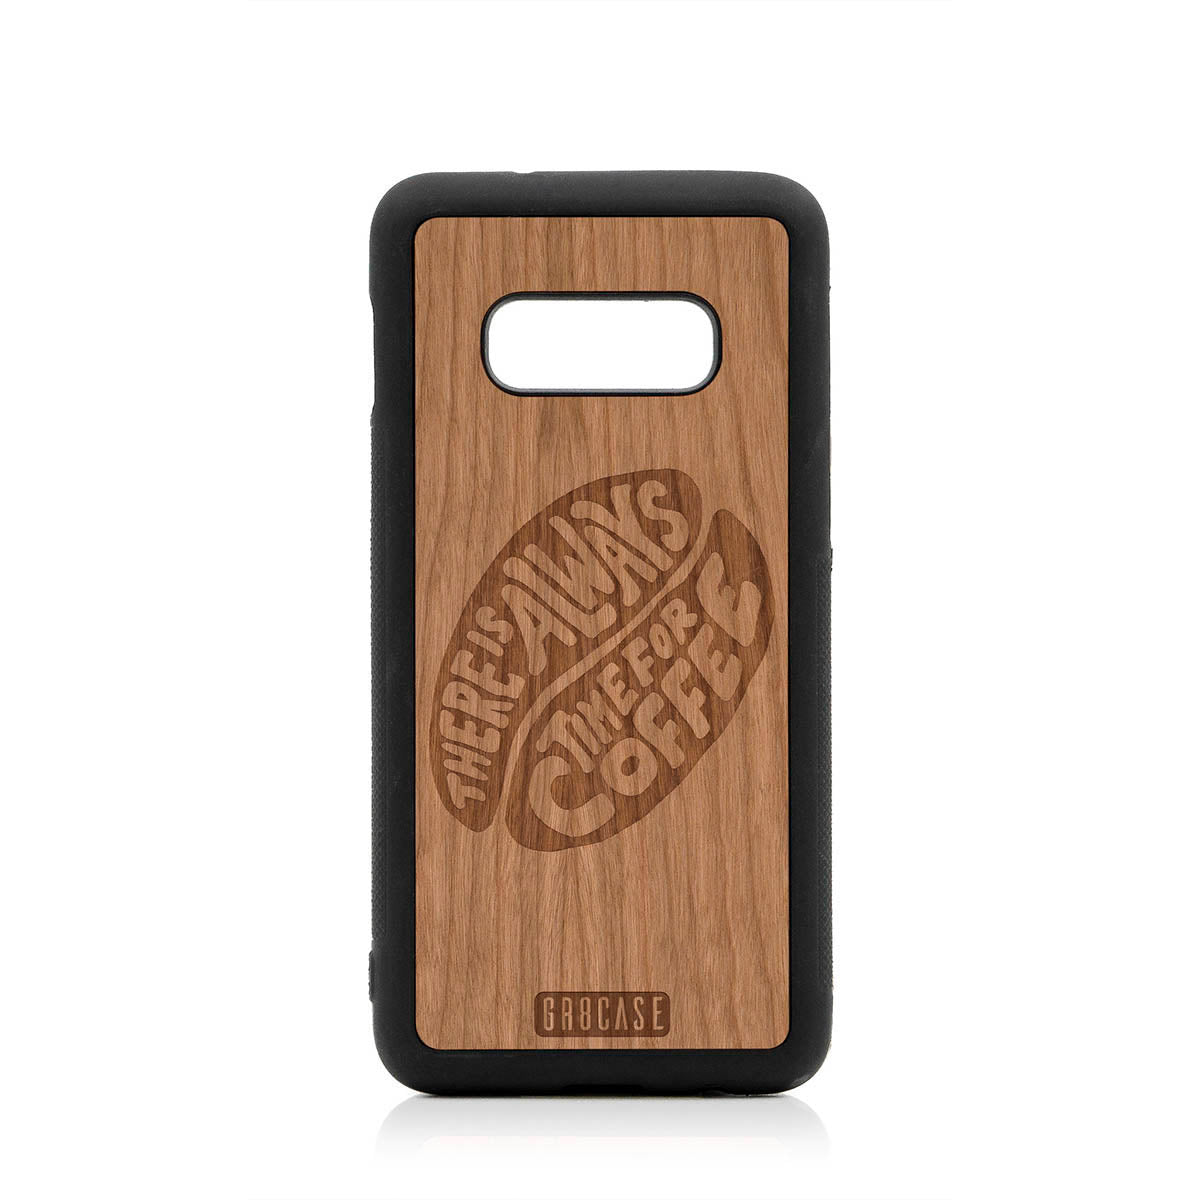 There Is Always Time For Coffee Design Wood Case For Samsung Galaxy S10E